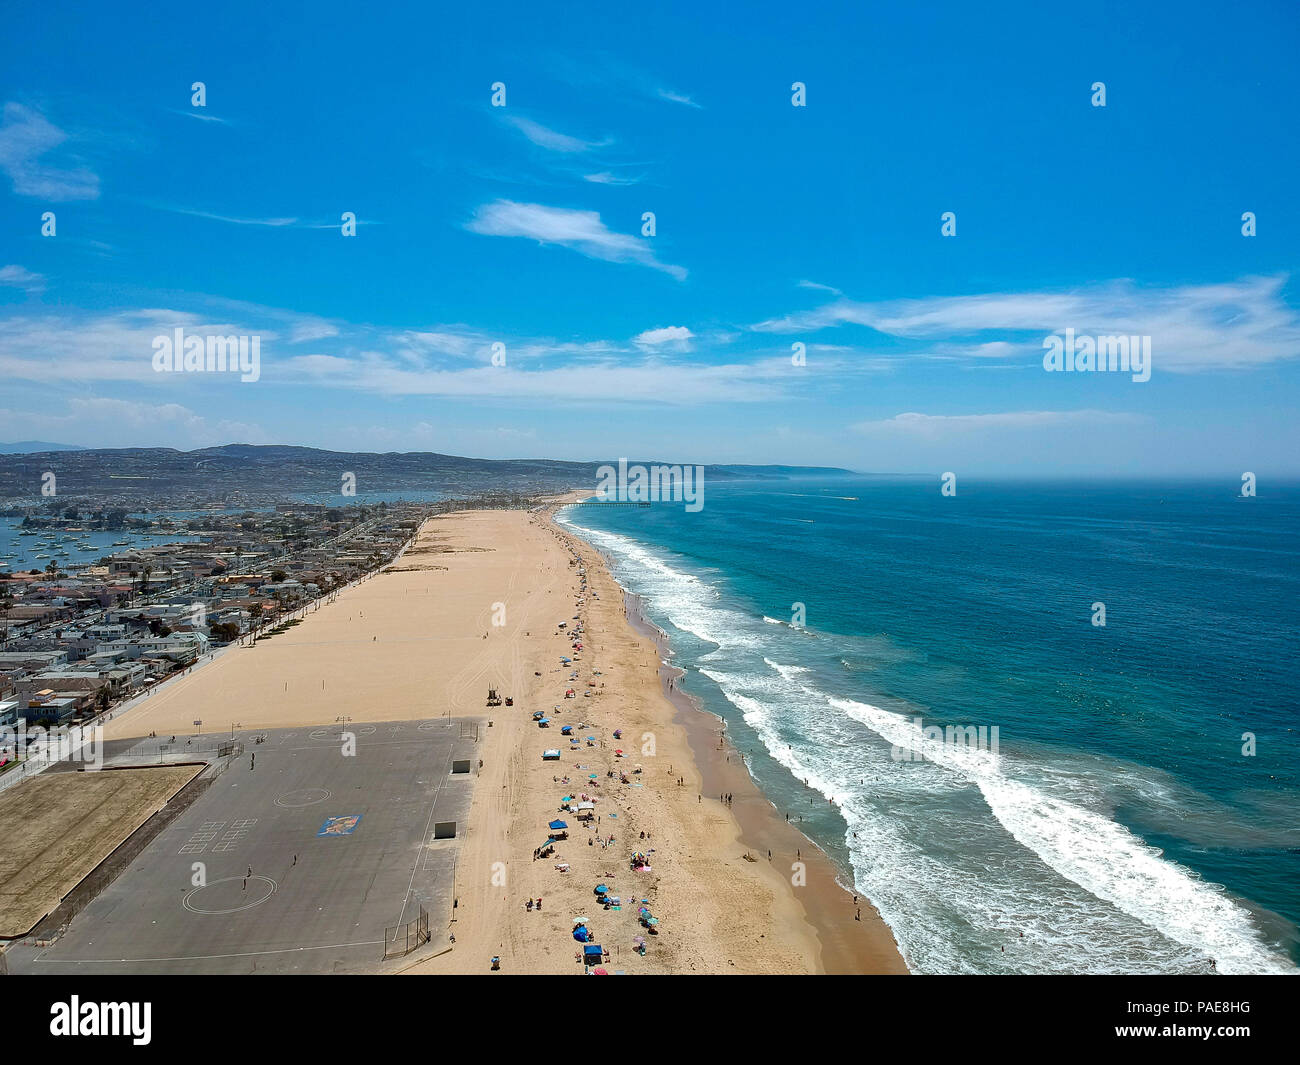 A California Beach lined with those looking to soak up the warm coast sun and splash in the cool Pacific Ocean. Image captured from an aerial drone at Stock Photo